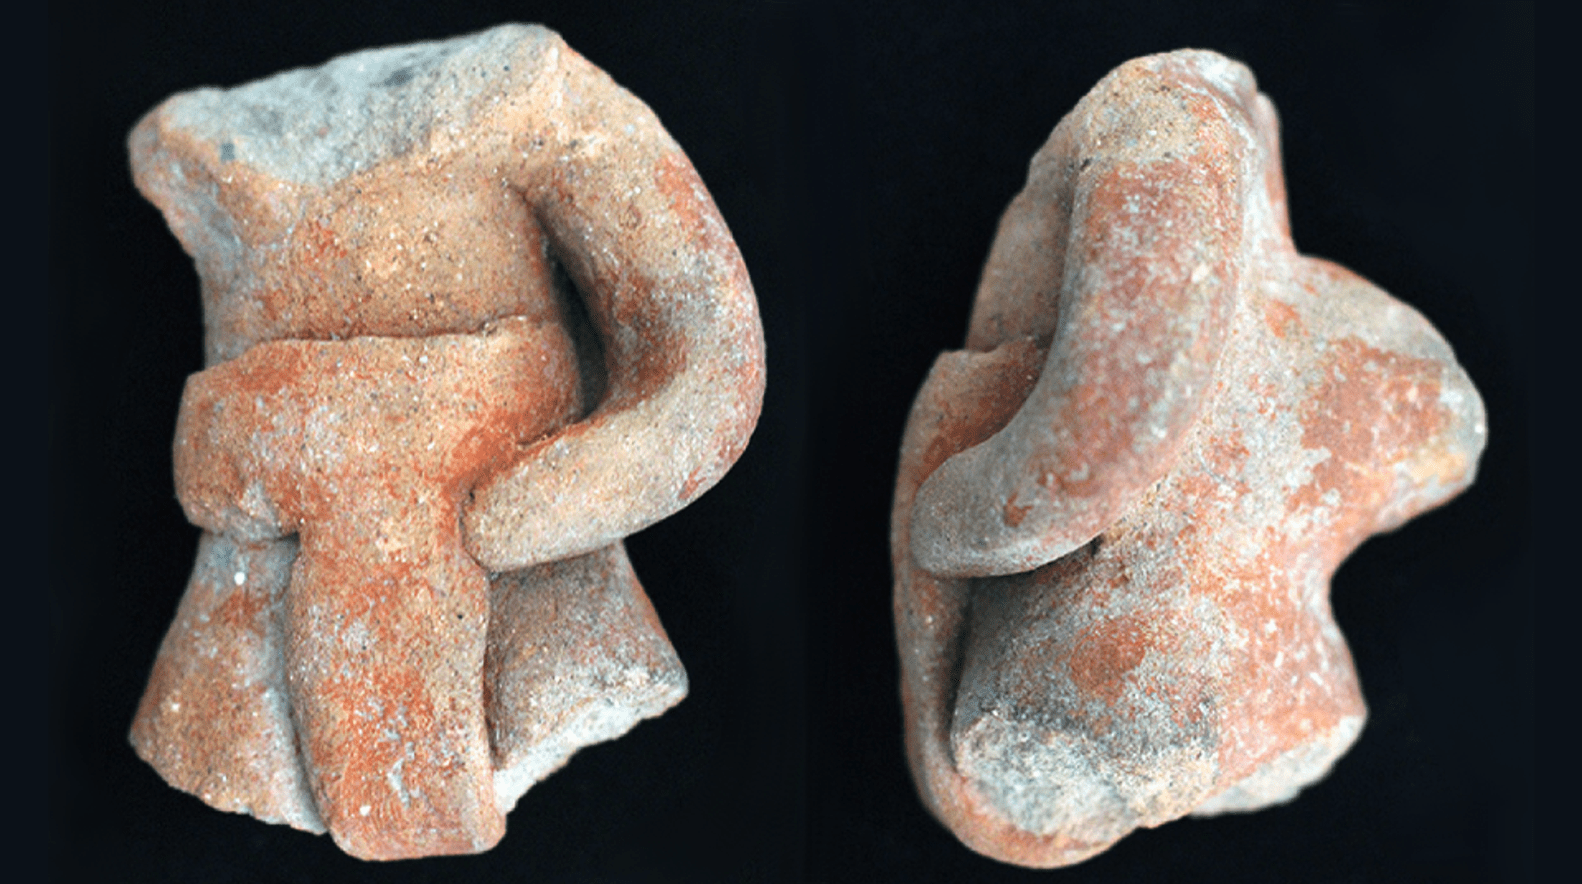 Ceramic ballplayer figures found at the Etlatongo site in Mexico. (Image: Blomster and Salazar Chávez, 2020/Science Advances)